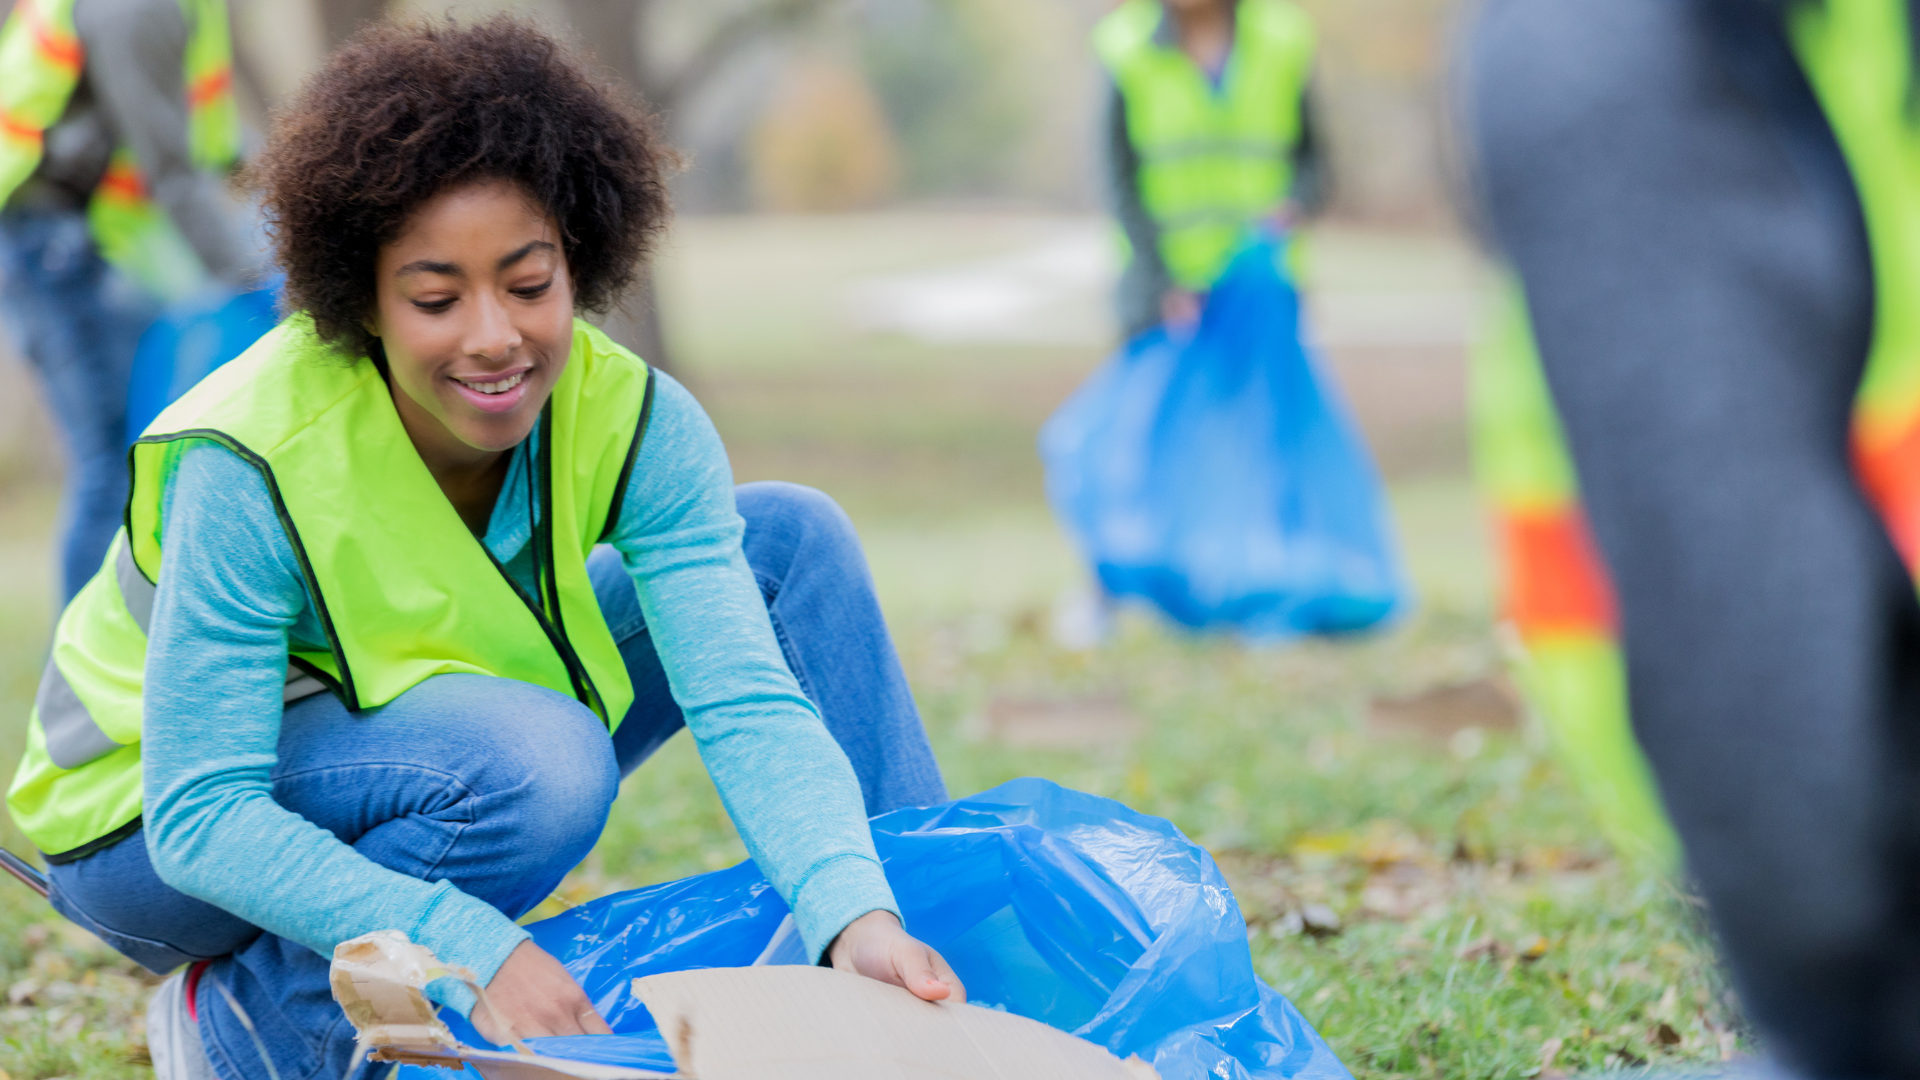 Environmental Volunteering: How to Make a Positive Impact on the Planet